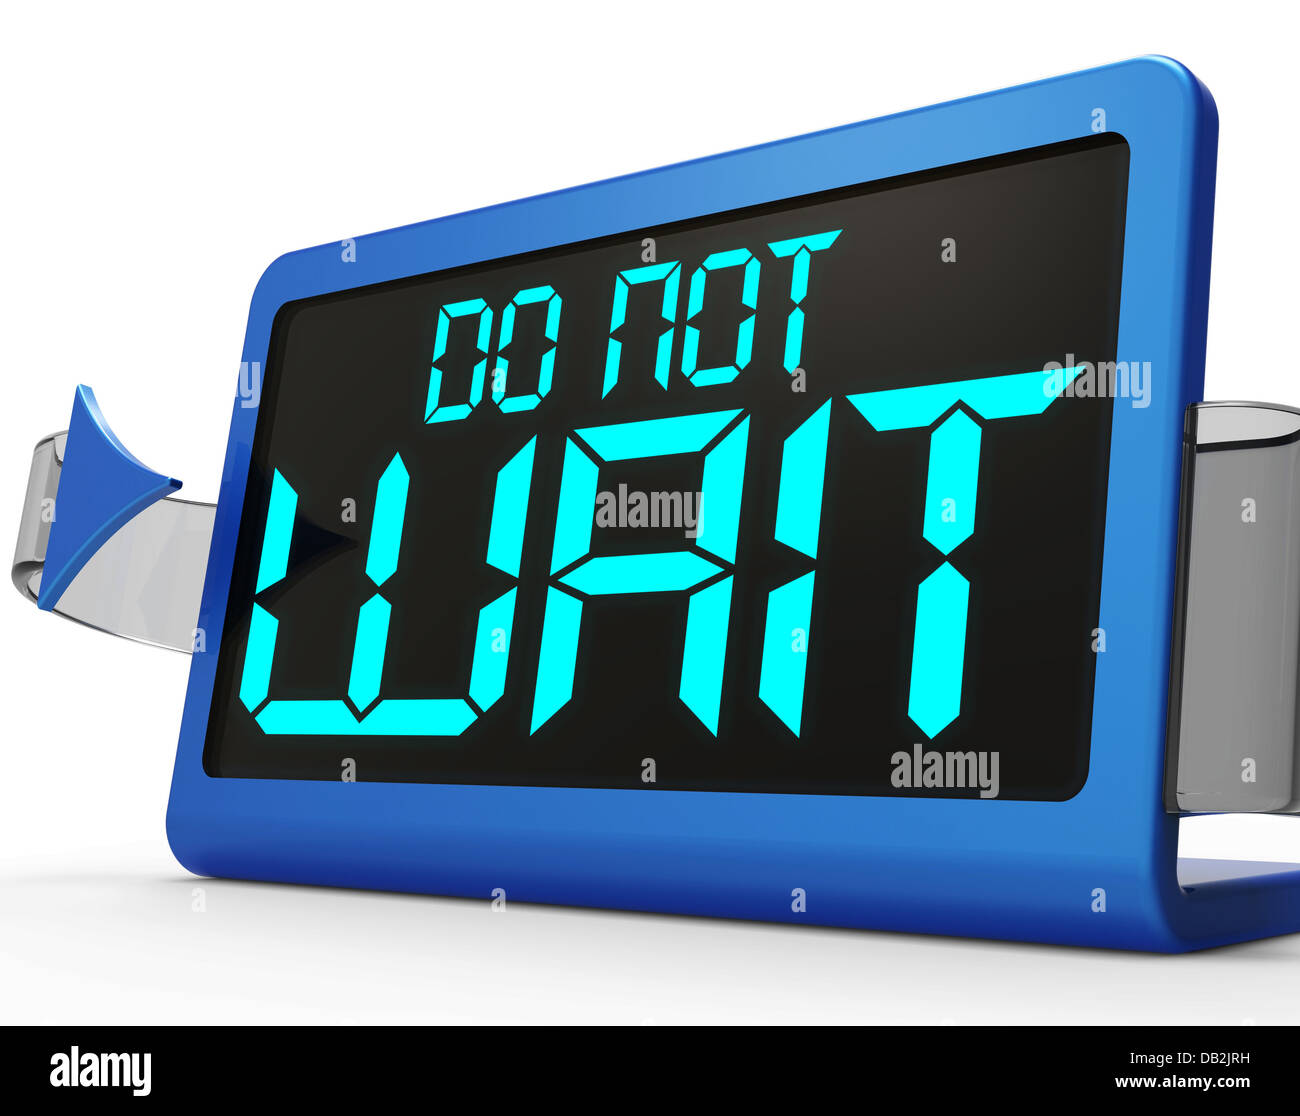 Do Not Wait Clock Showing Urgency For Action Stock Photo